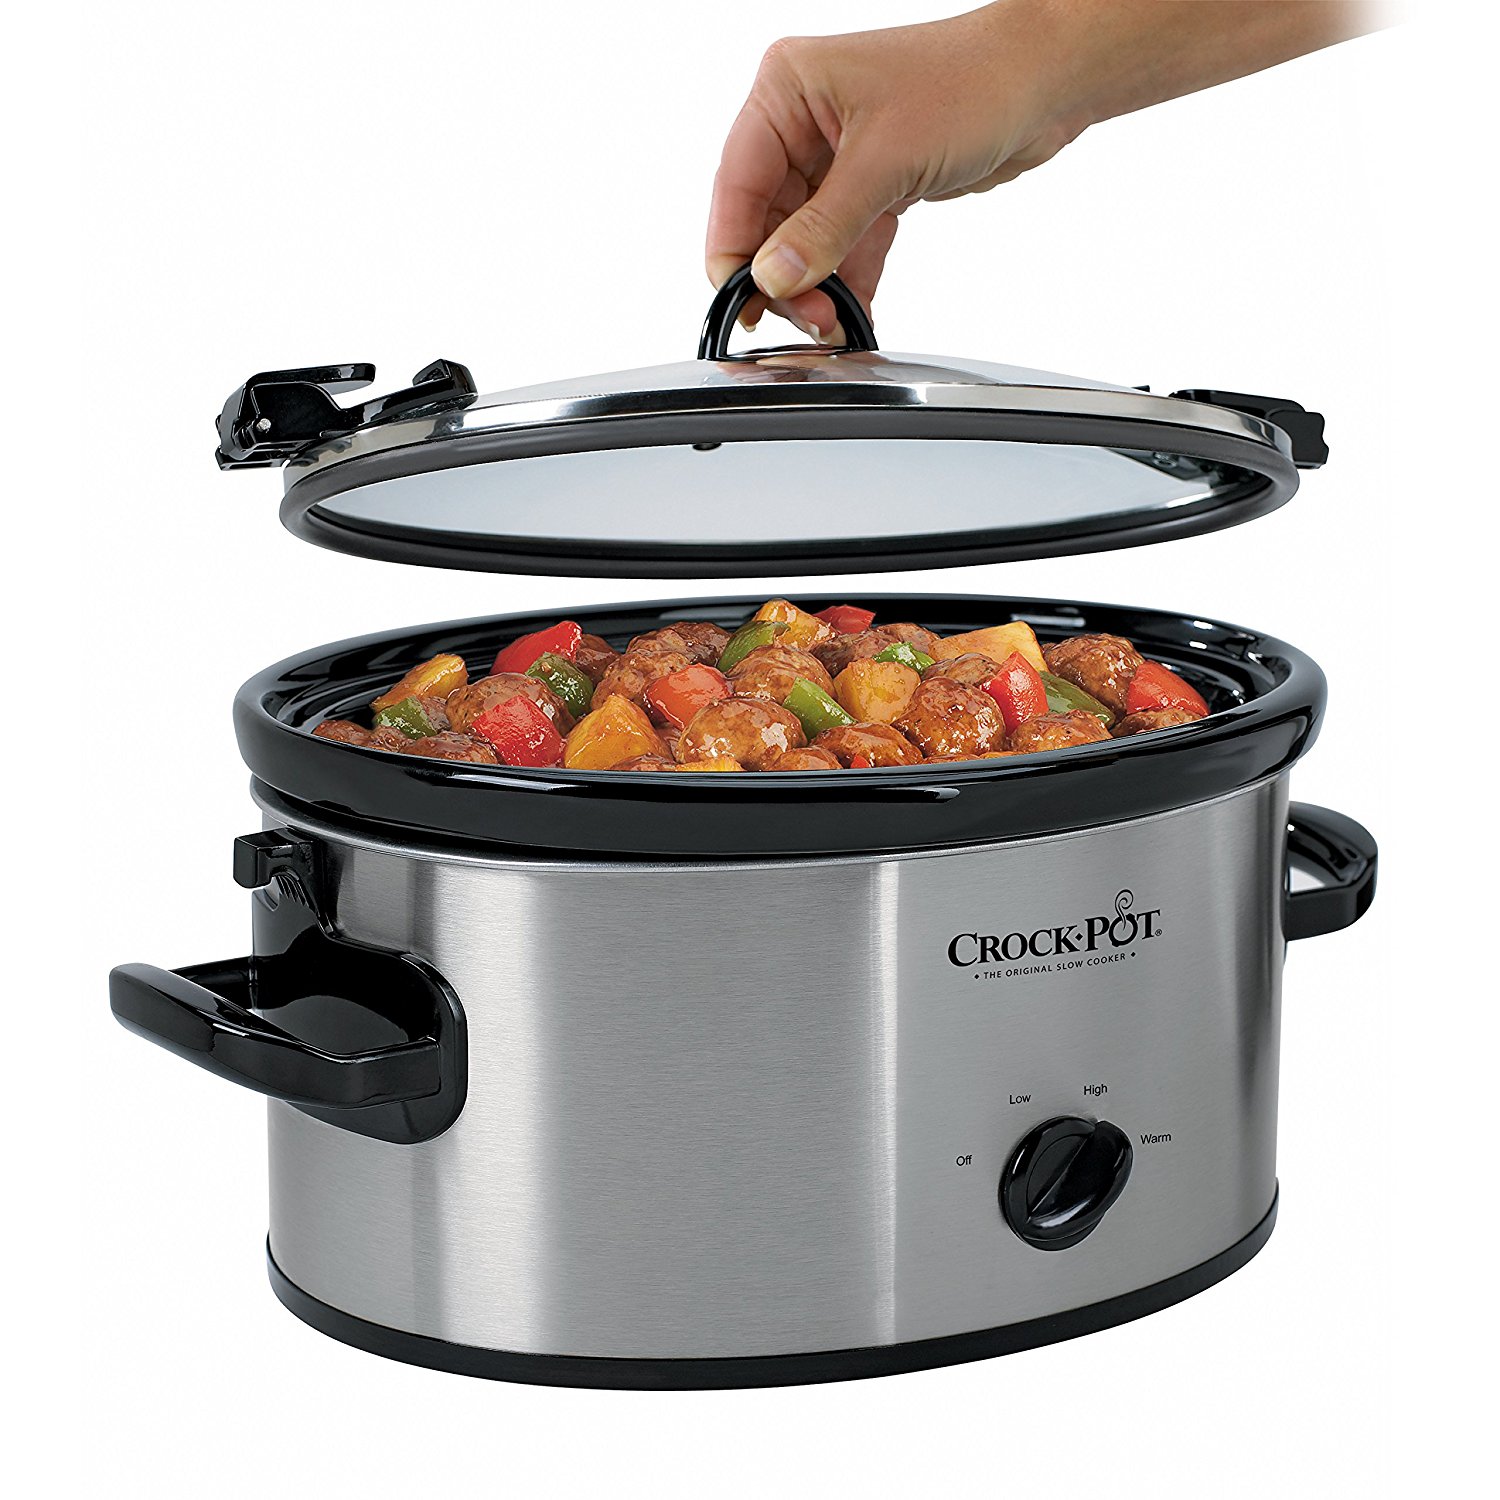 Crock-Pot Cook and Carry 6 Quart Oval Manual Portable Stainless Steel Slow Cooker - image 3 of 8